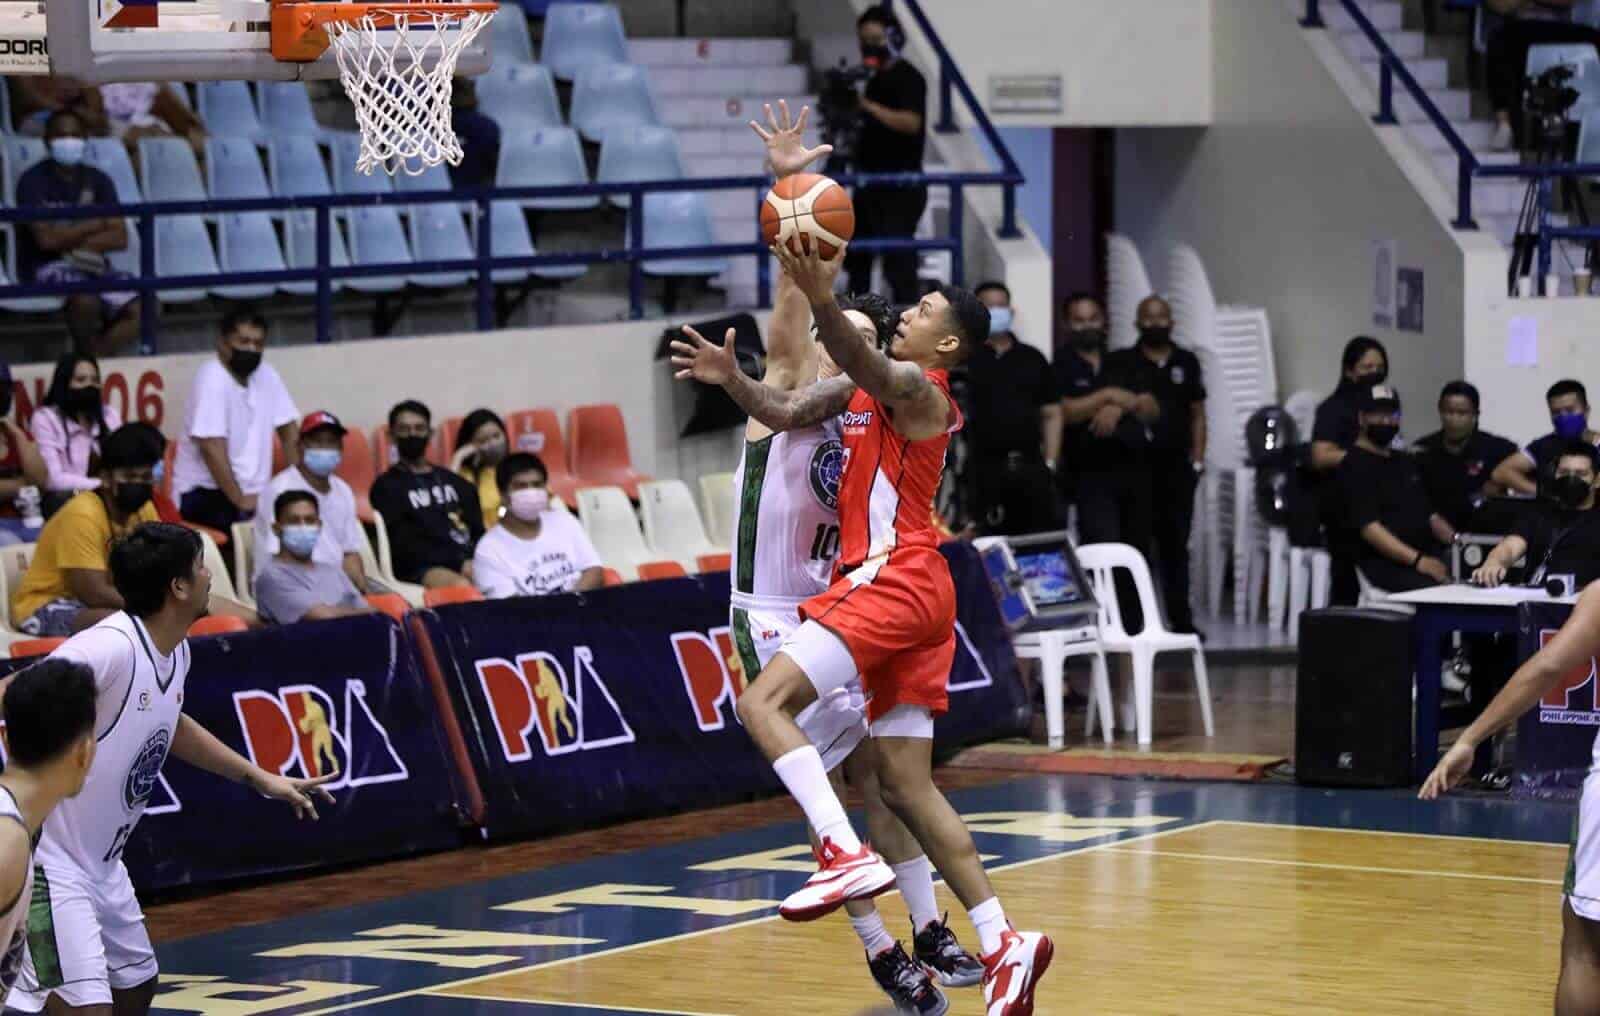 Jamie Malonzo, a talented basketball player, named PBA Player of the Week.